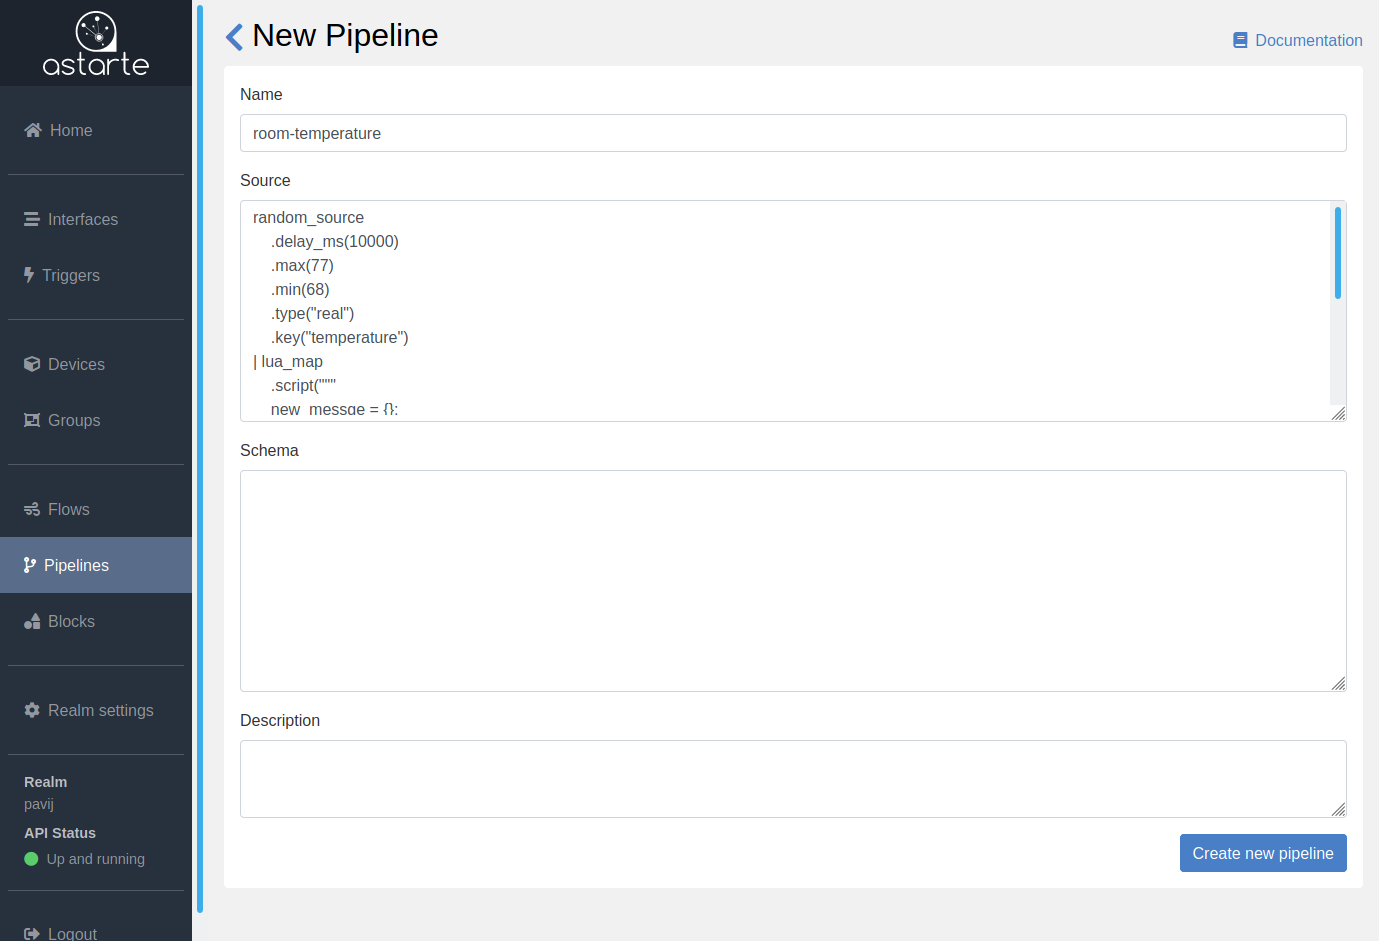 Pipeline definition with source